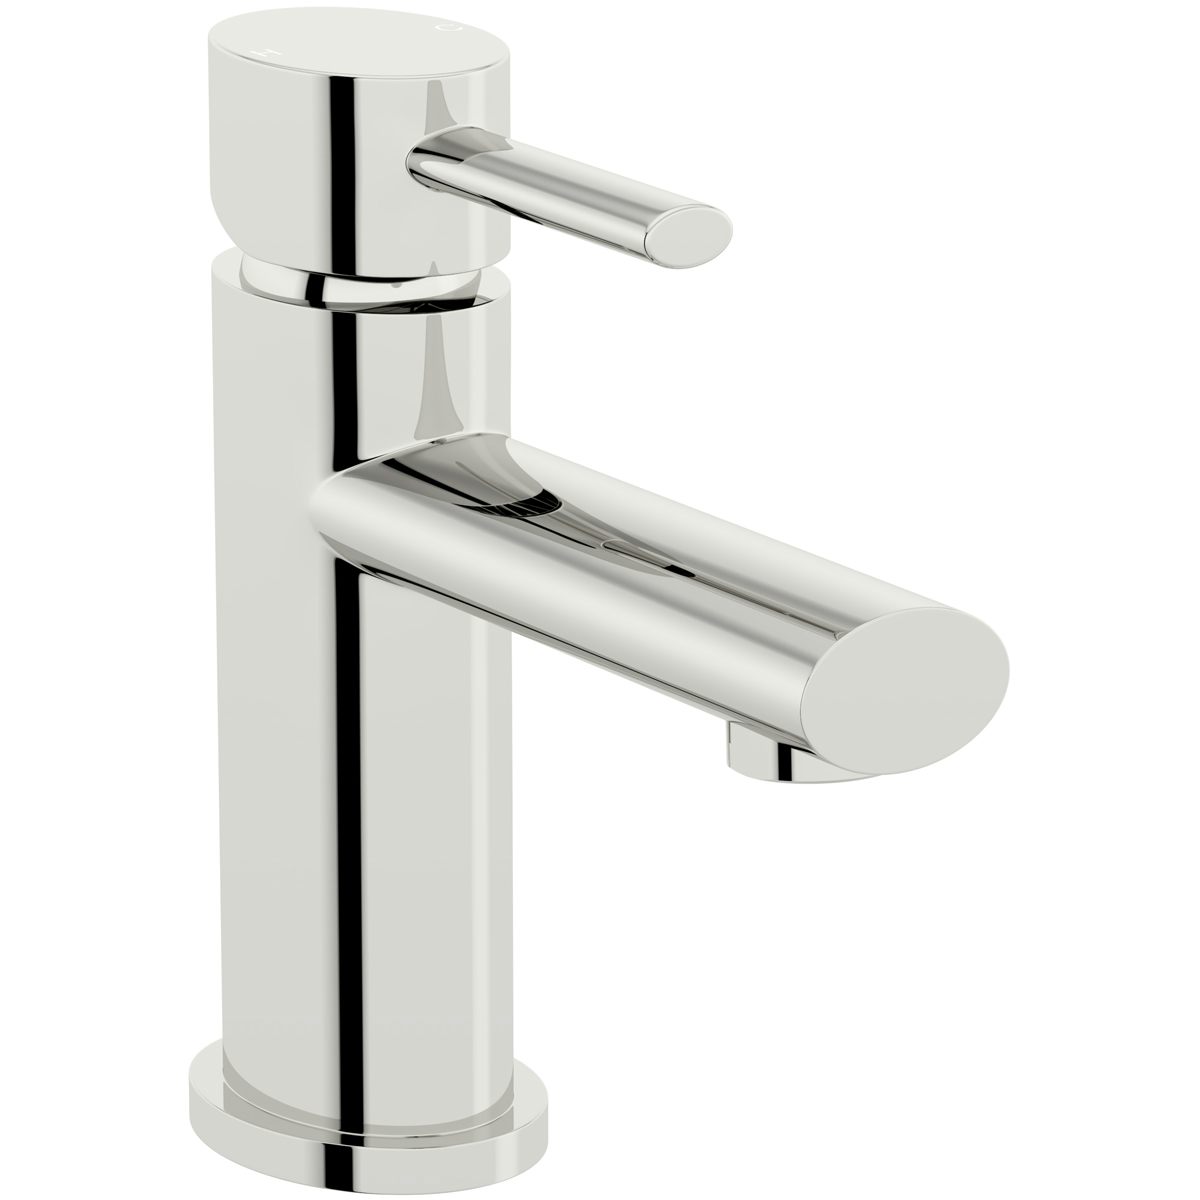 Orchard Elsdon basin mixer tap with slotted waste